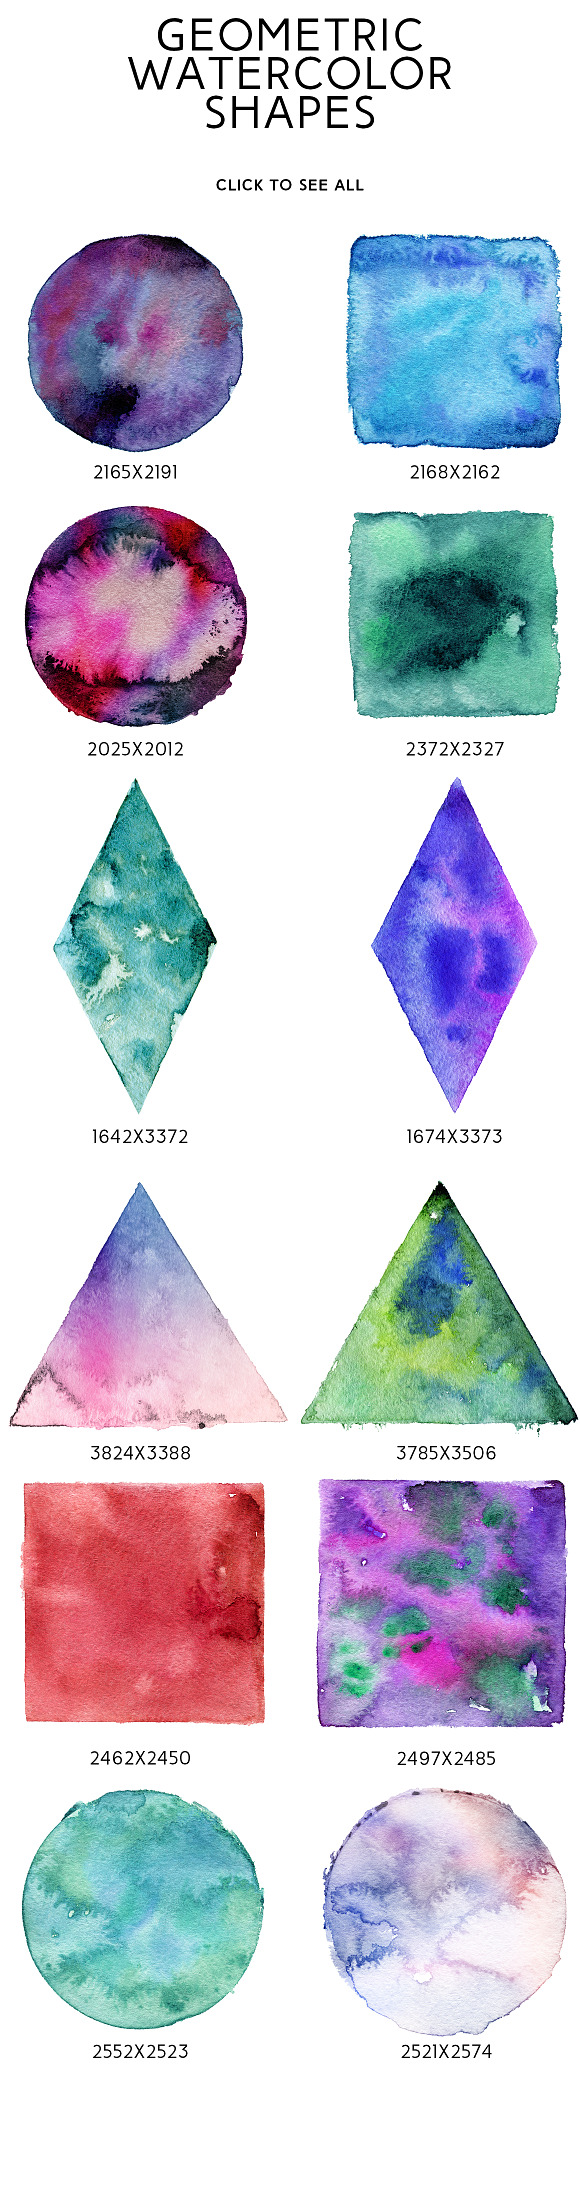 Geometric Watercolor Shapes in Objects - product preview 4